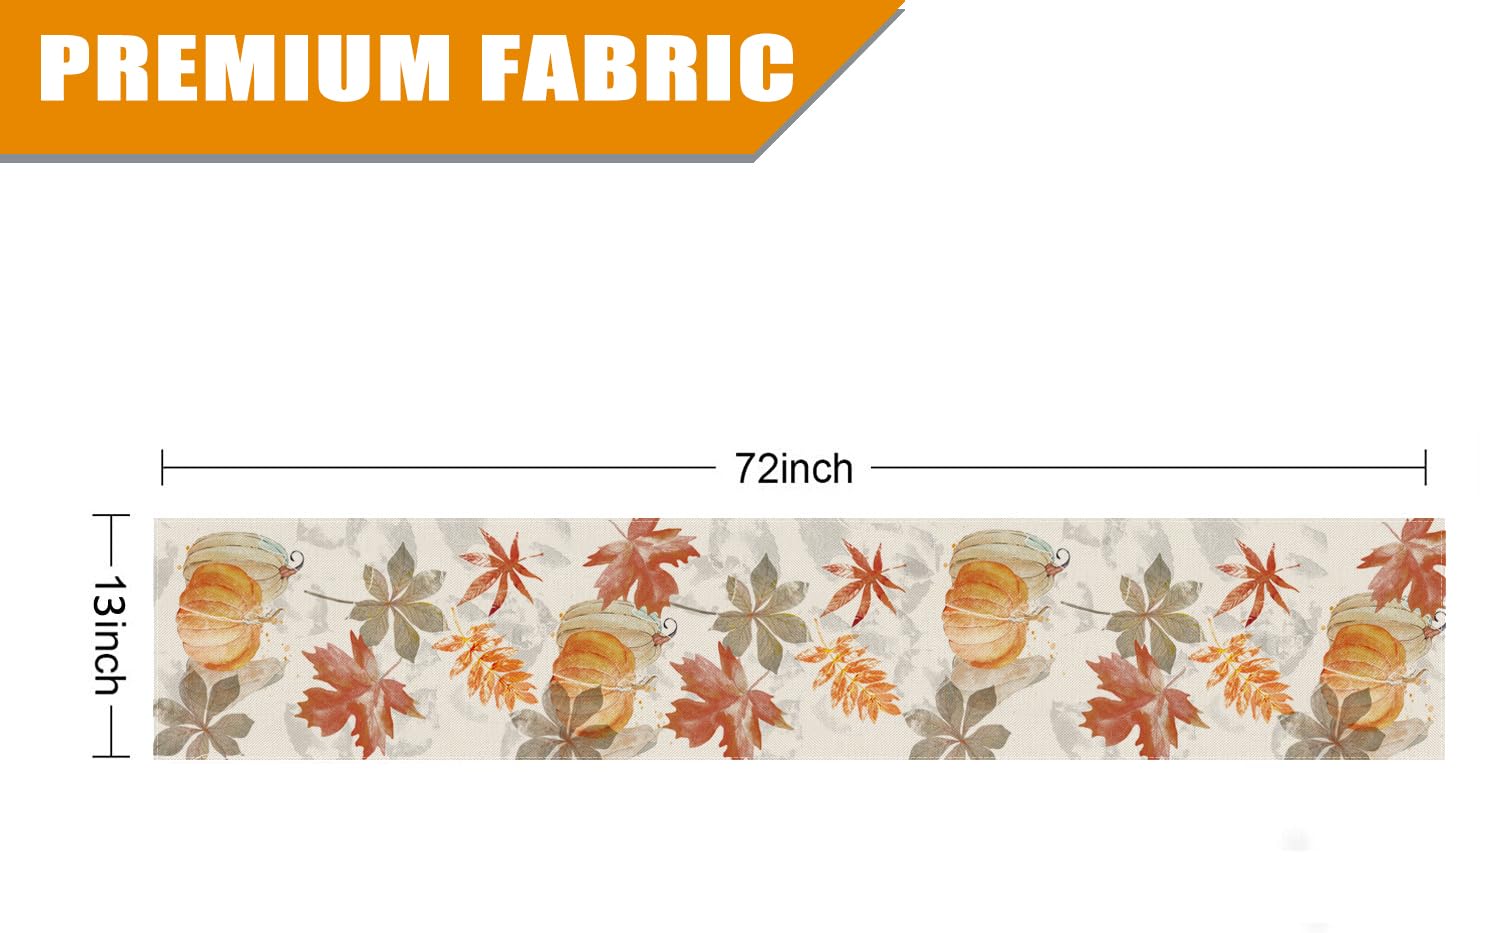 Fall Table Runner Pumpkin Maple Leaf Watercolor Vintage Table Runners Seasonal Autumn Thanksgiving Harvest Home Kitchen Dining Party Decorations 13x72 Inch